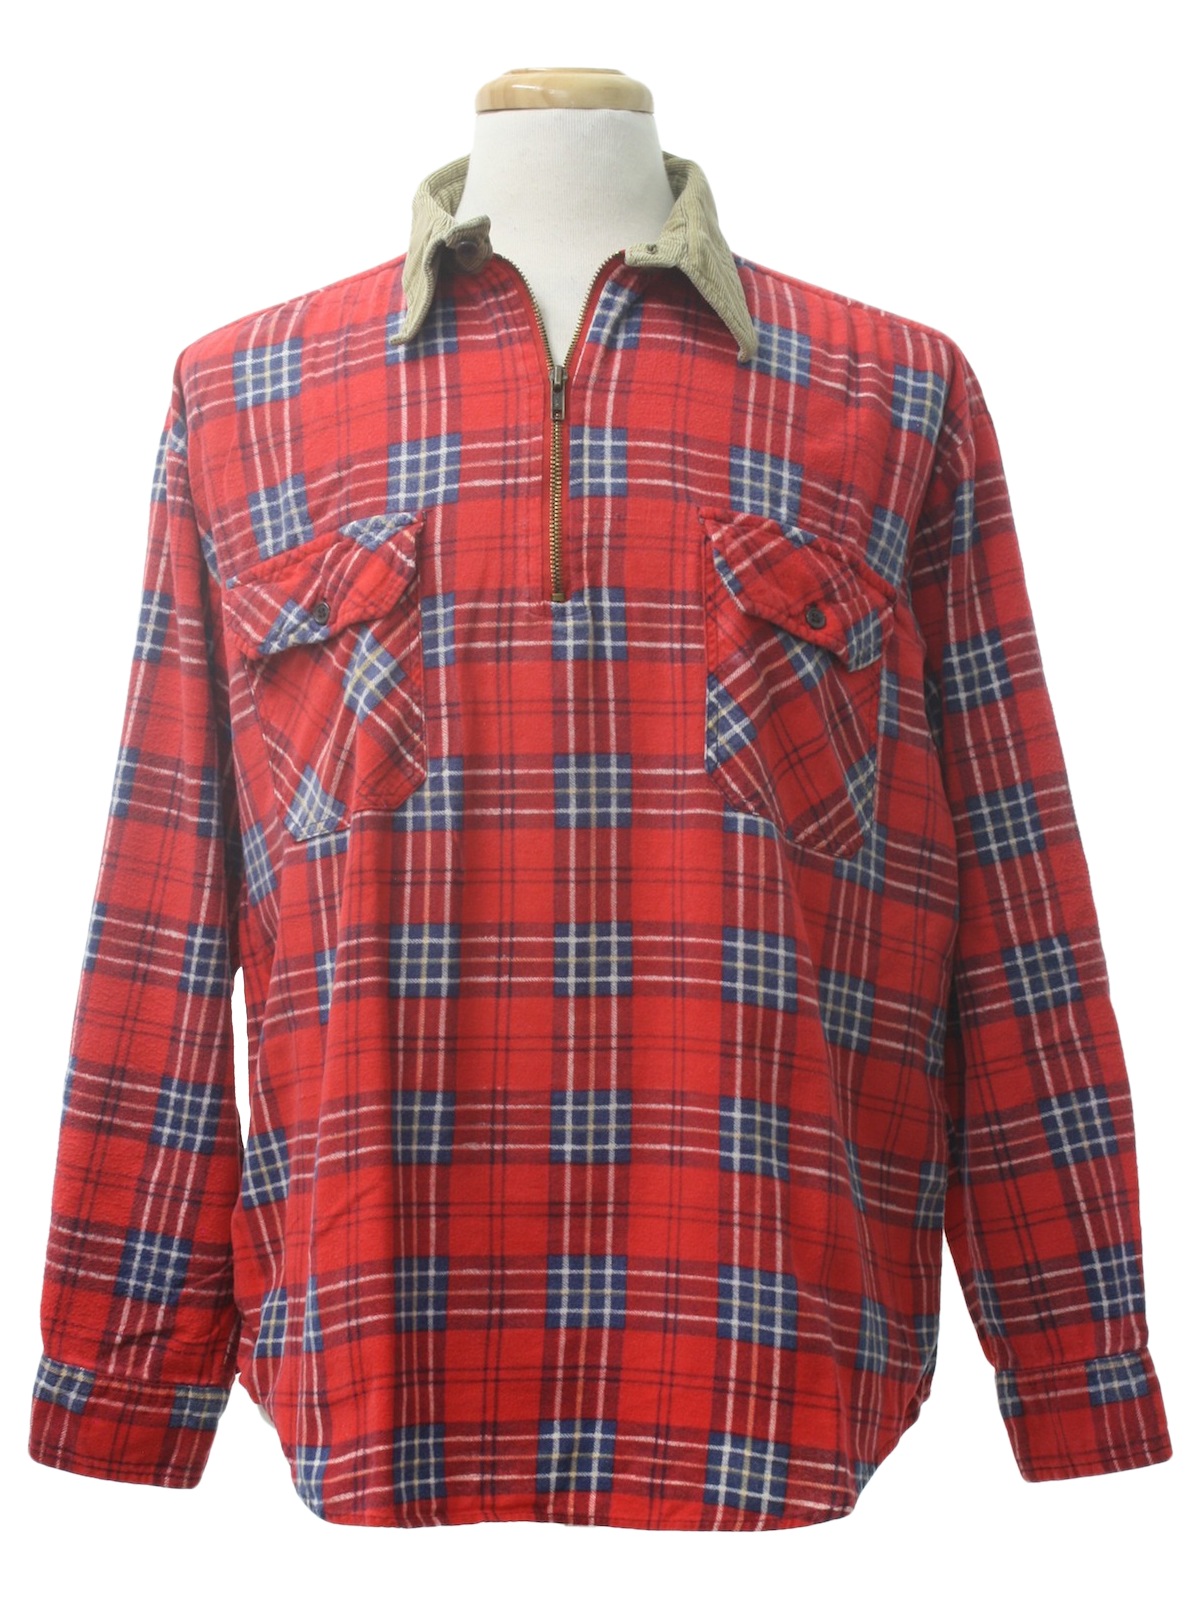 90s  Timber Run  Mens red background with navy blue and white plaid